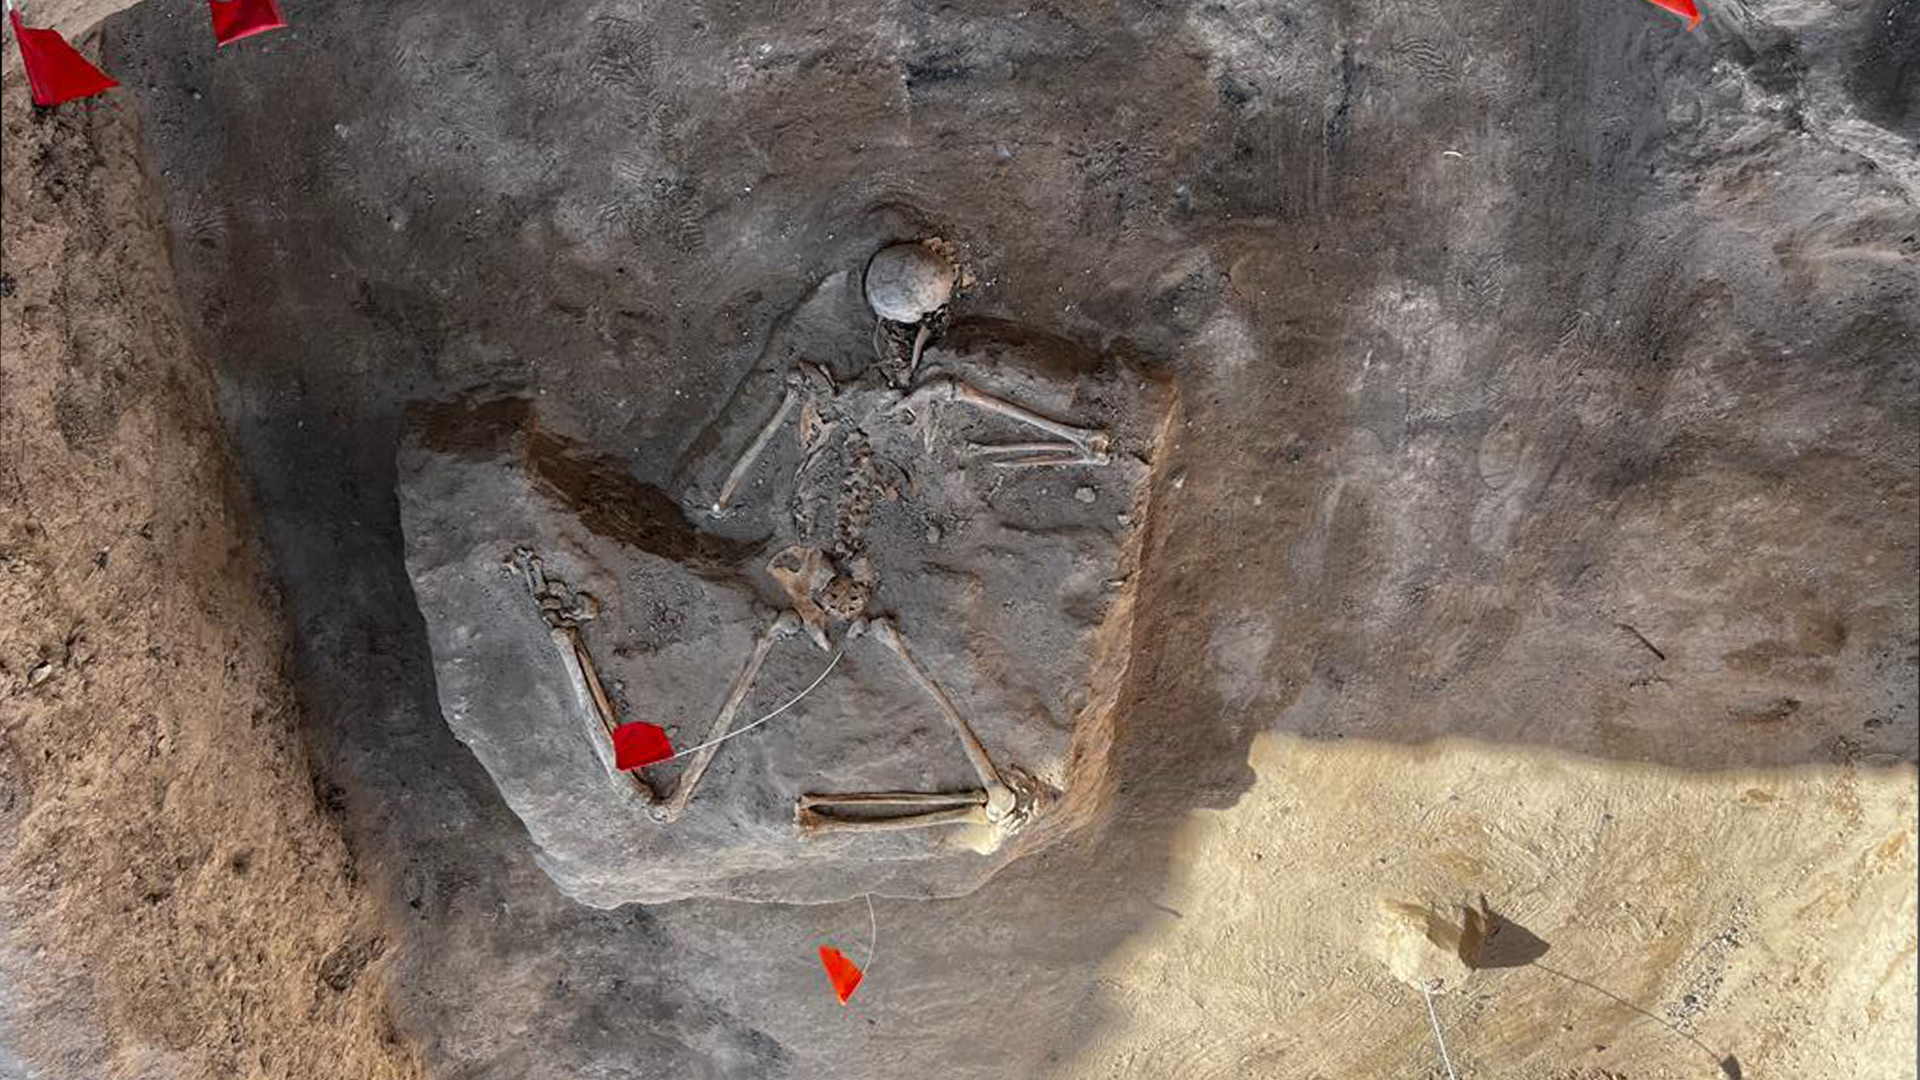 2,700-year-old extremely well preserved skeleton found in fortress in Turkey may be an earthquake victim Live Science pic